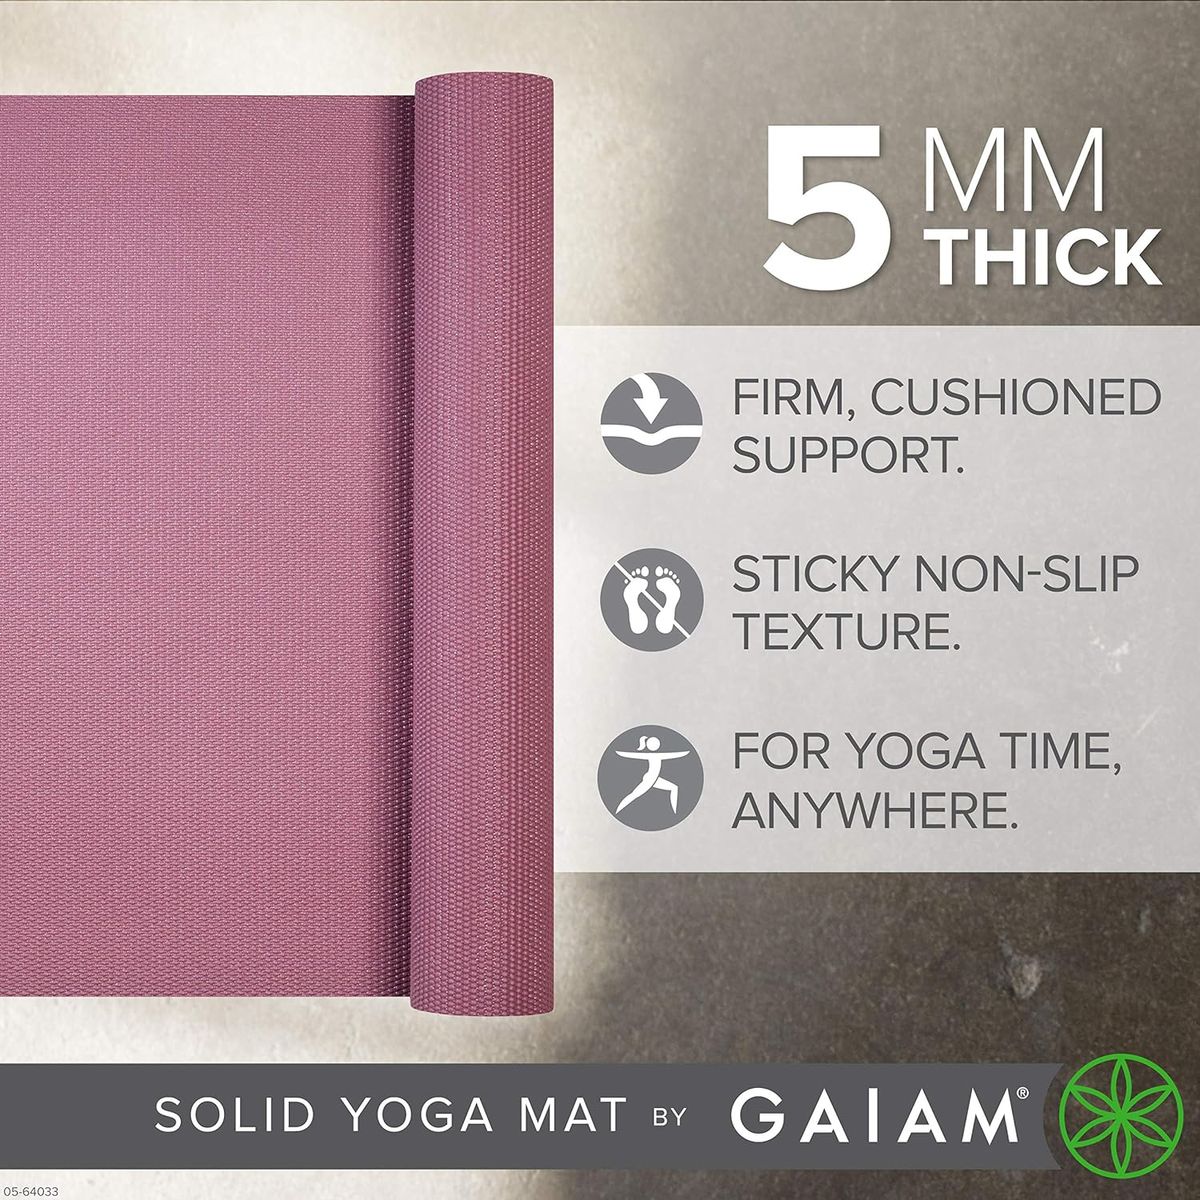 Gaiam Yoga Mat - Premium 5mm Print Thick Non Slip Exercise & Fitness Mat  for All Types of Yoga, Pilates & Floor Workouts (68 x 24 x 5mm)